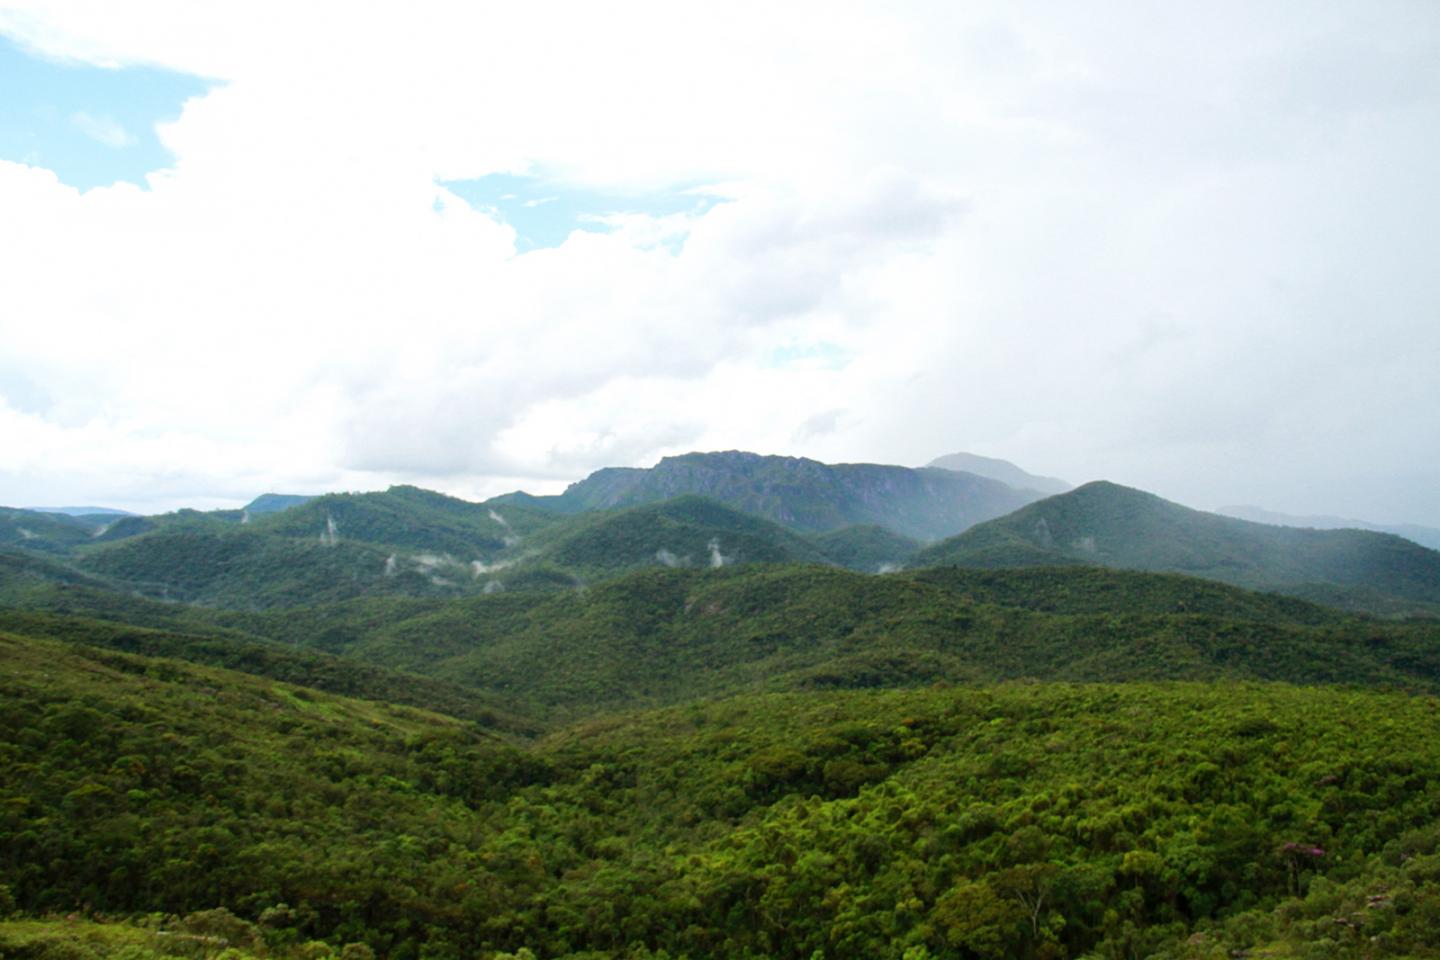 The Atlantic Forest